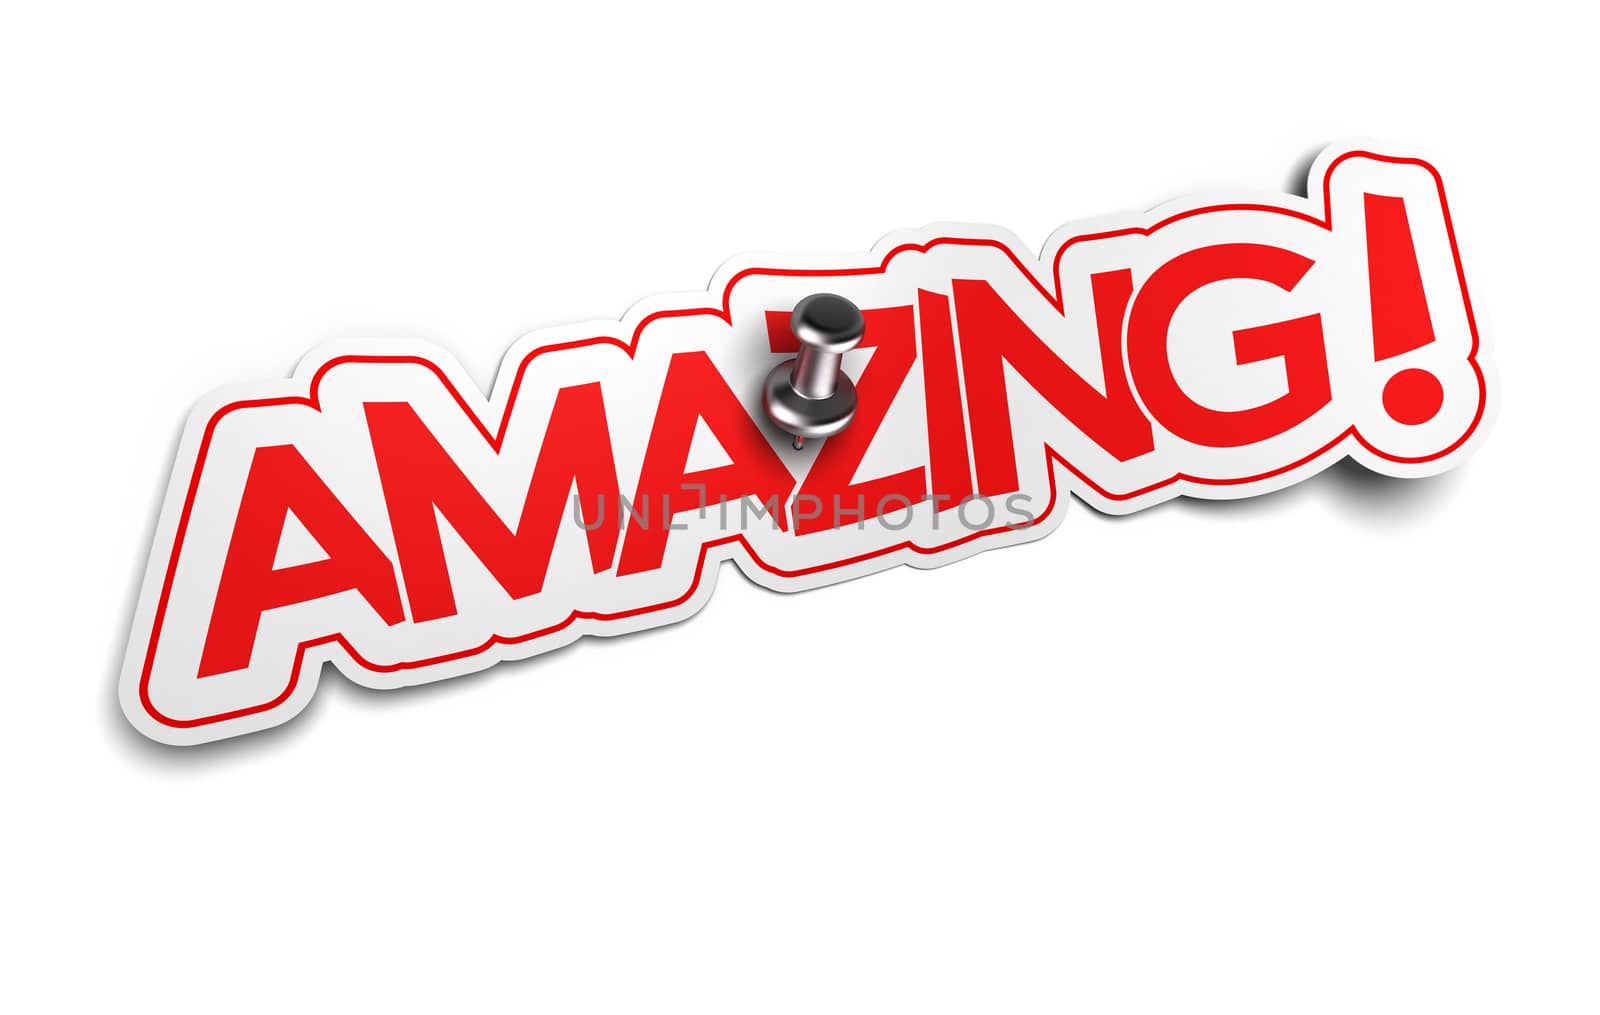 Amazing word on sticker, Exclamation Sticker for illustration of surprise or incredible news